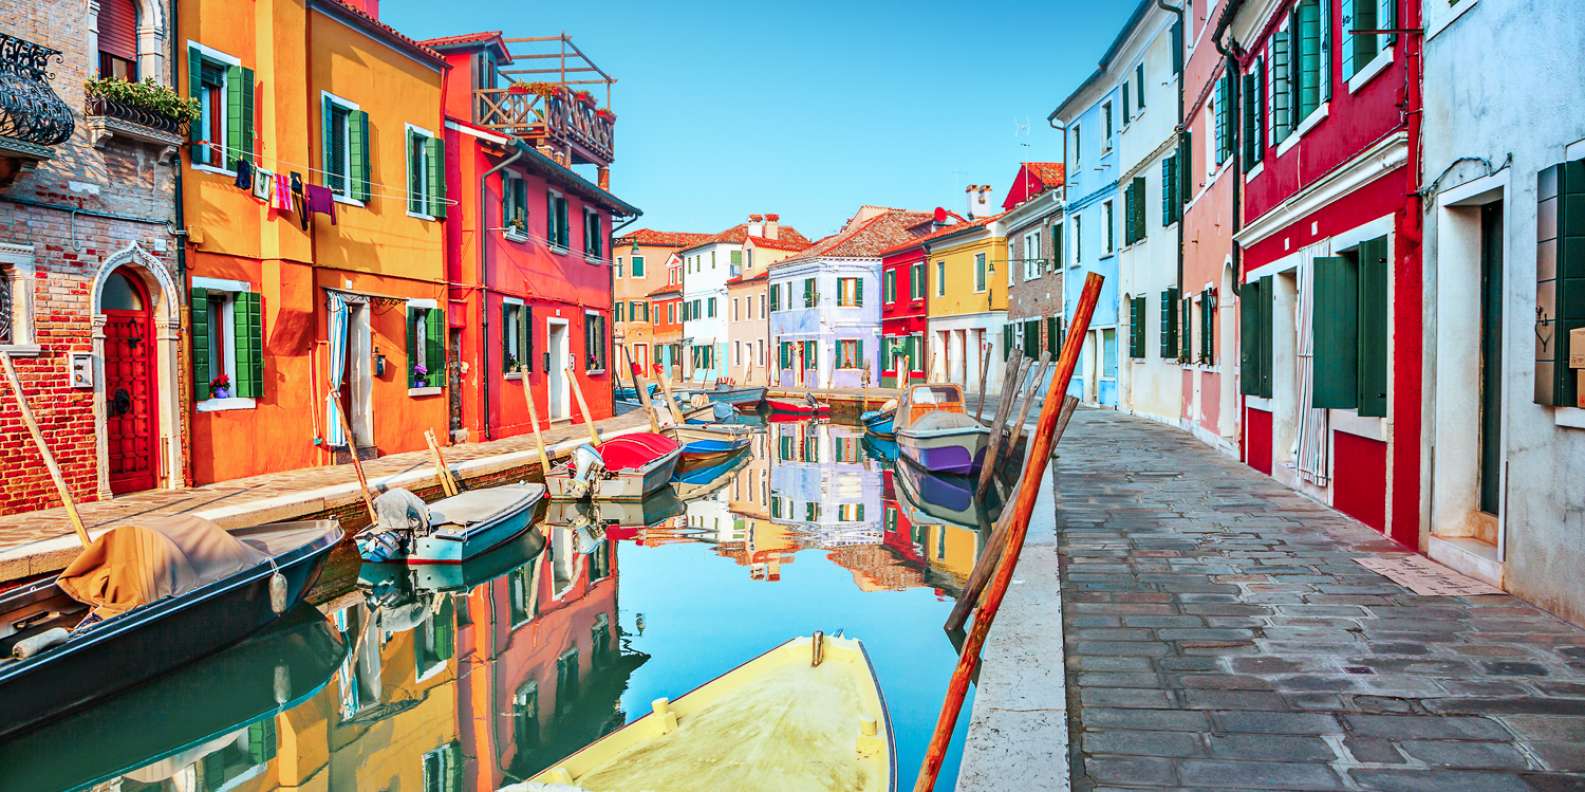 What to do in Burano